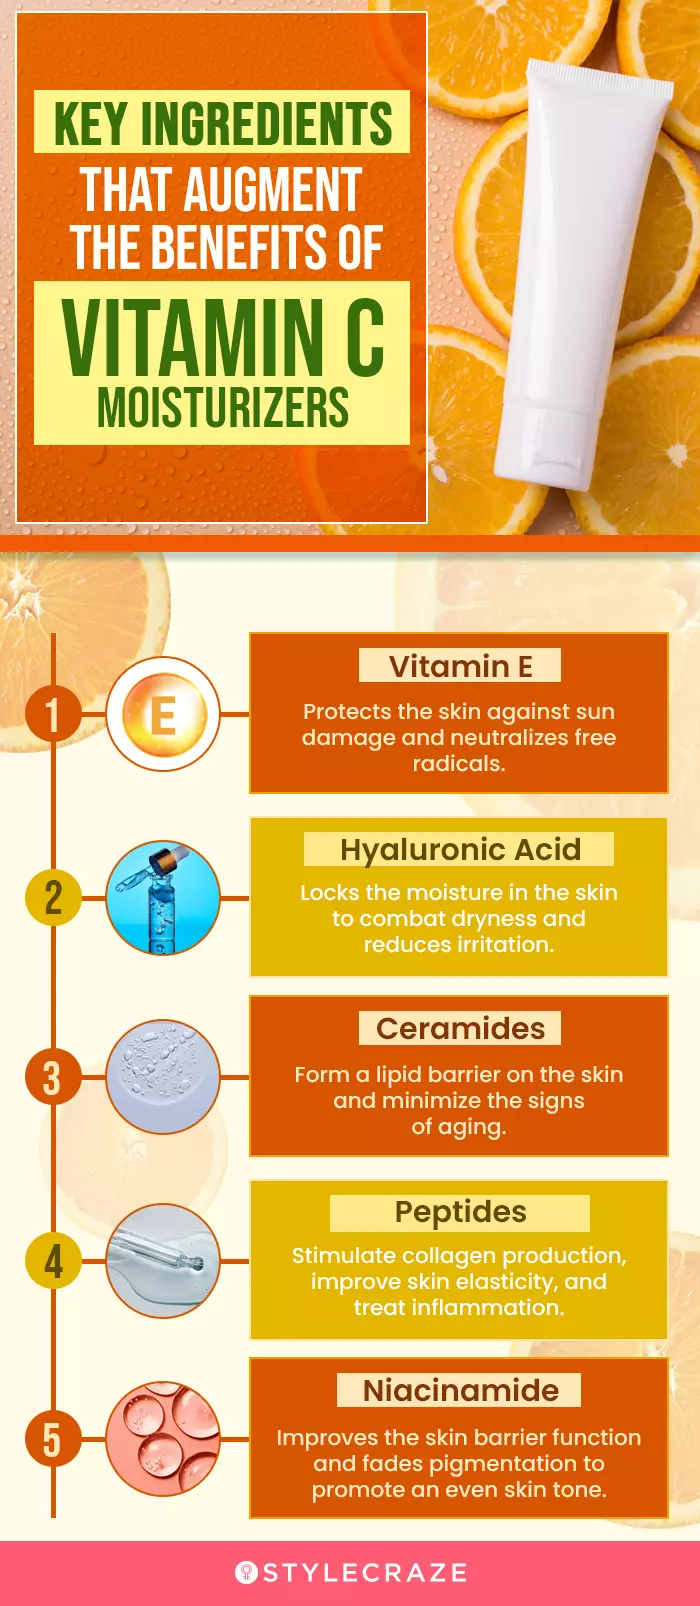 Key Ingredients That Augment The Benefits Of Vitamin C Moisturizers (infographic)